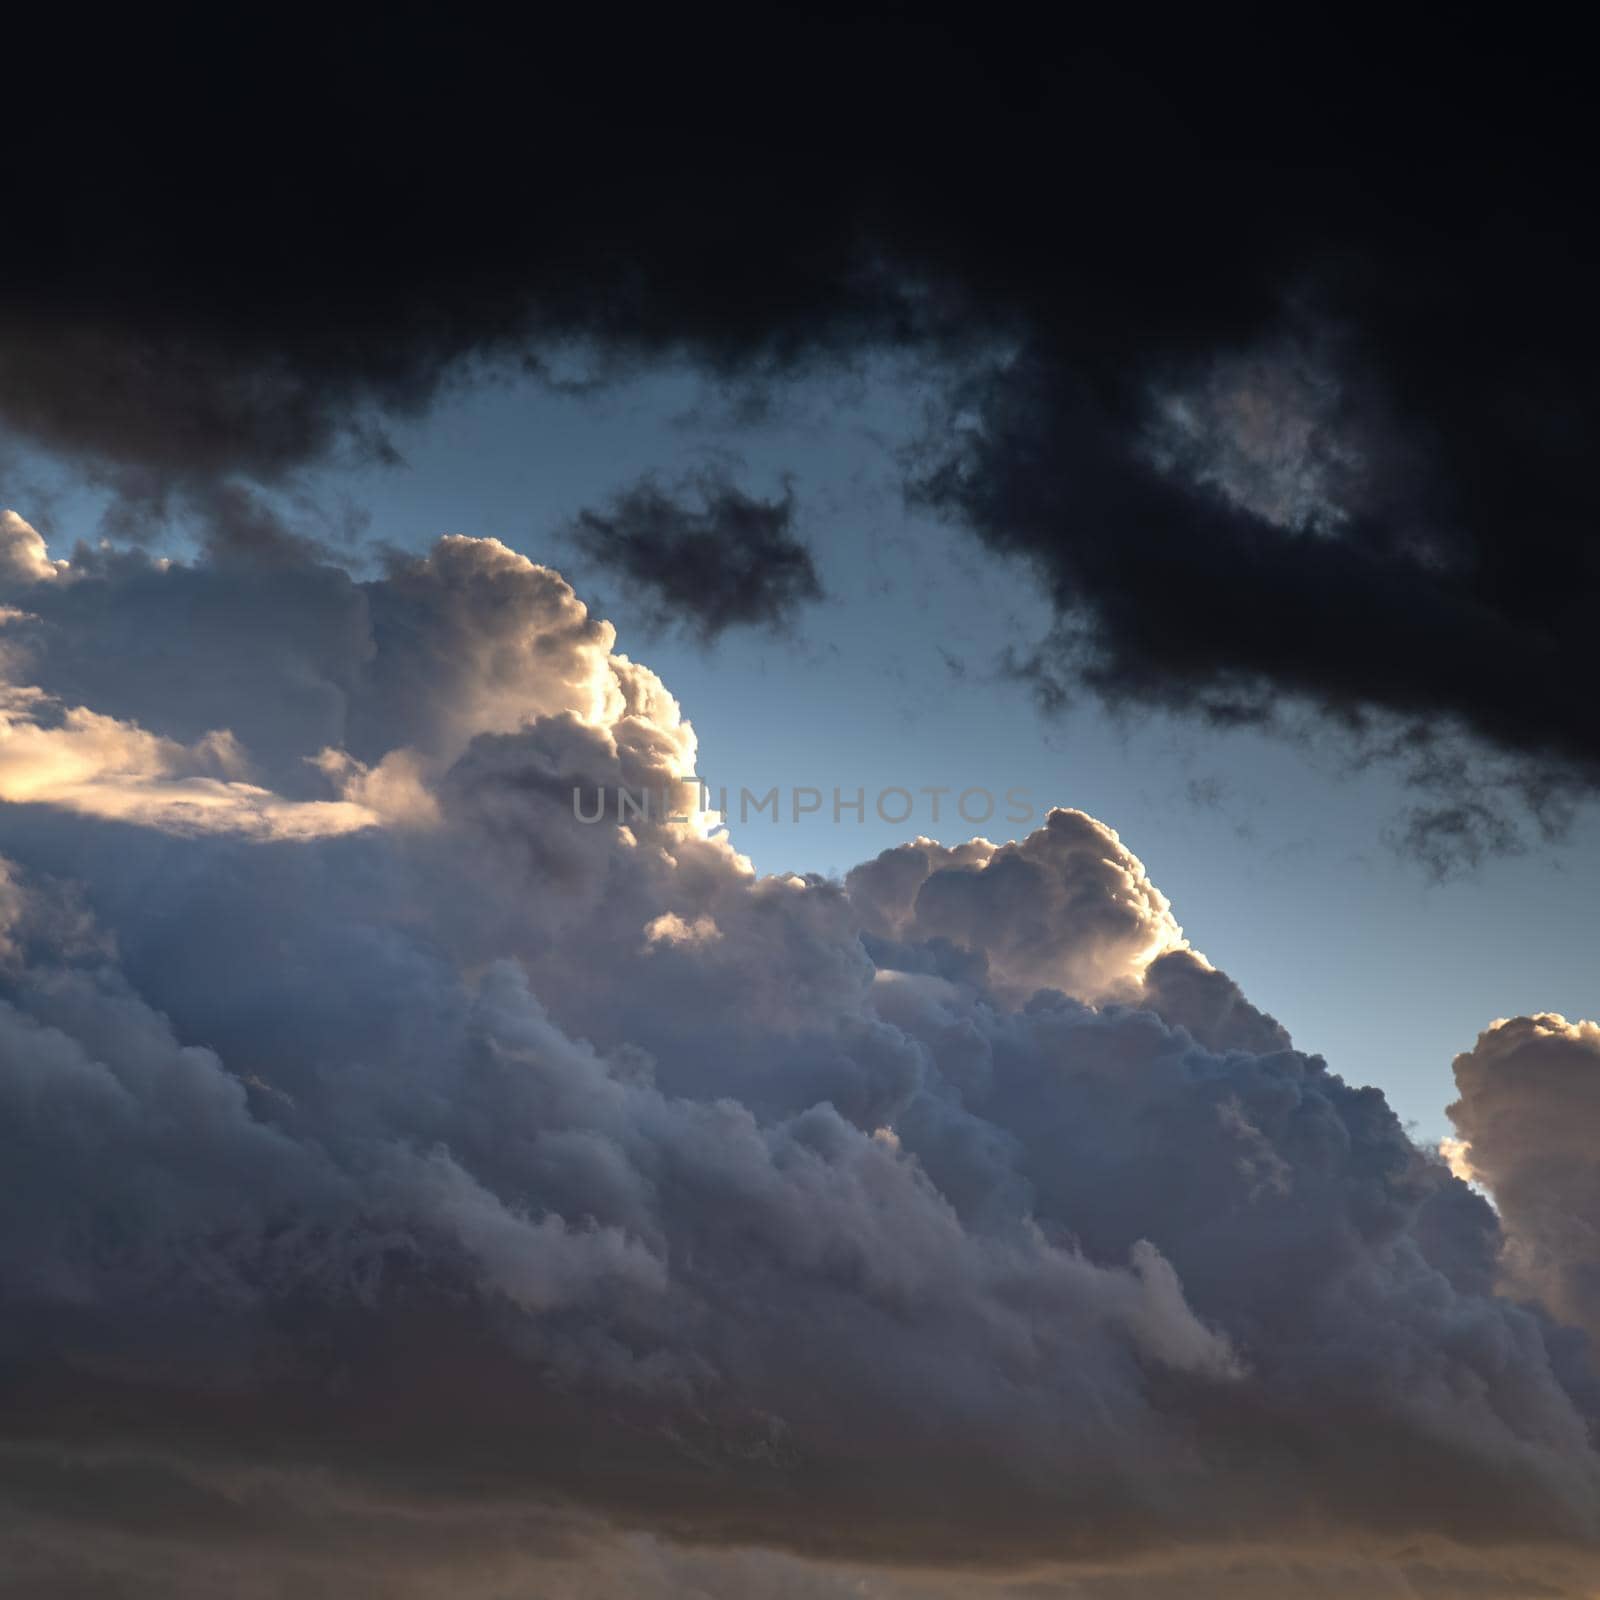 Confrontation of light and darkness. Clouds lighted with sun versus dark overhanging heavy clouds. Dramatic sky at sunset